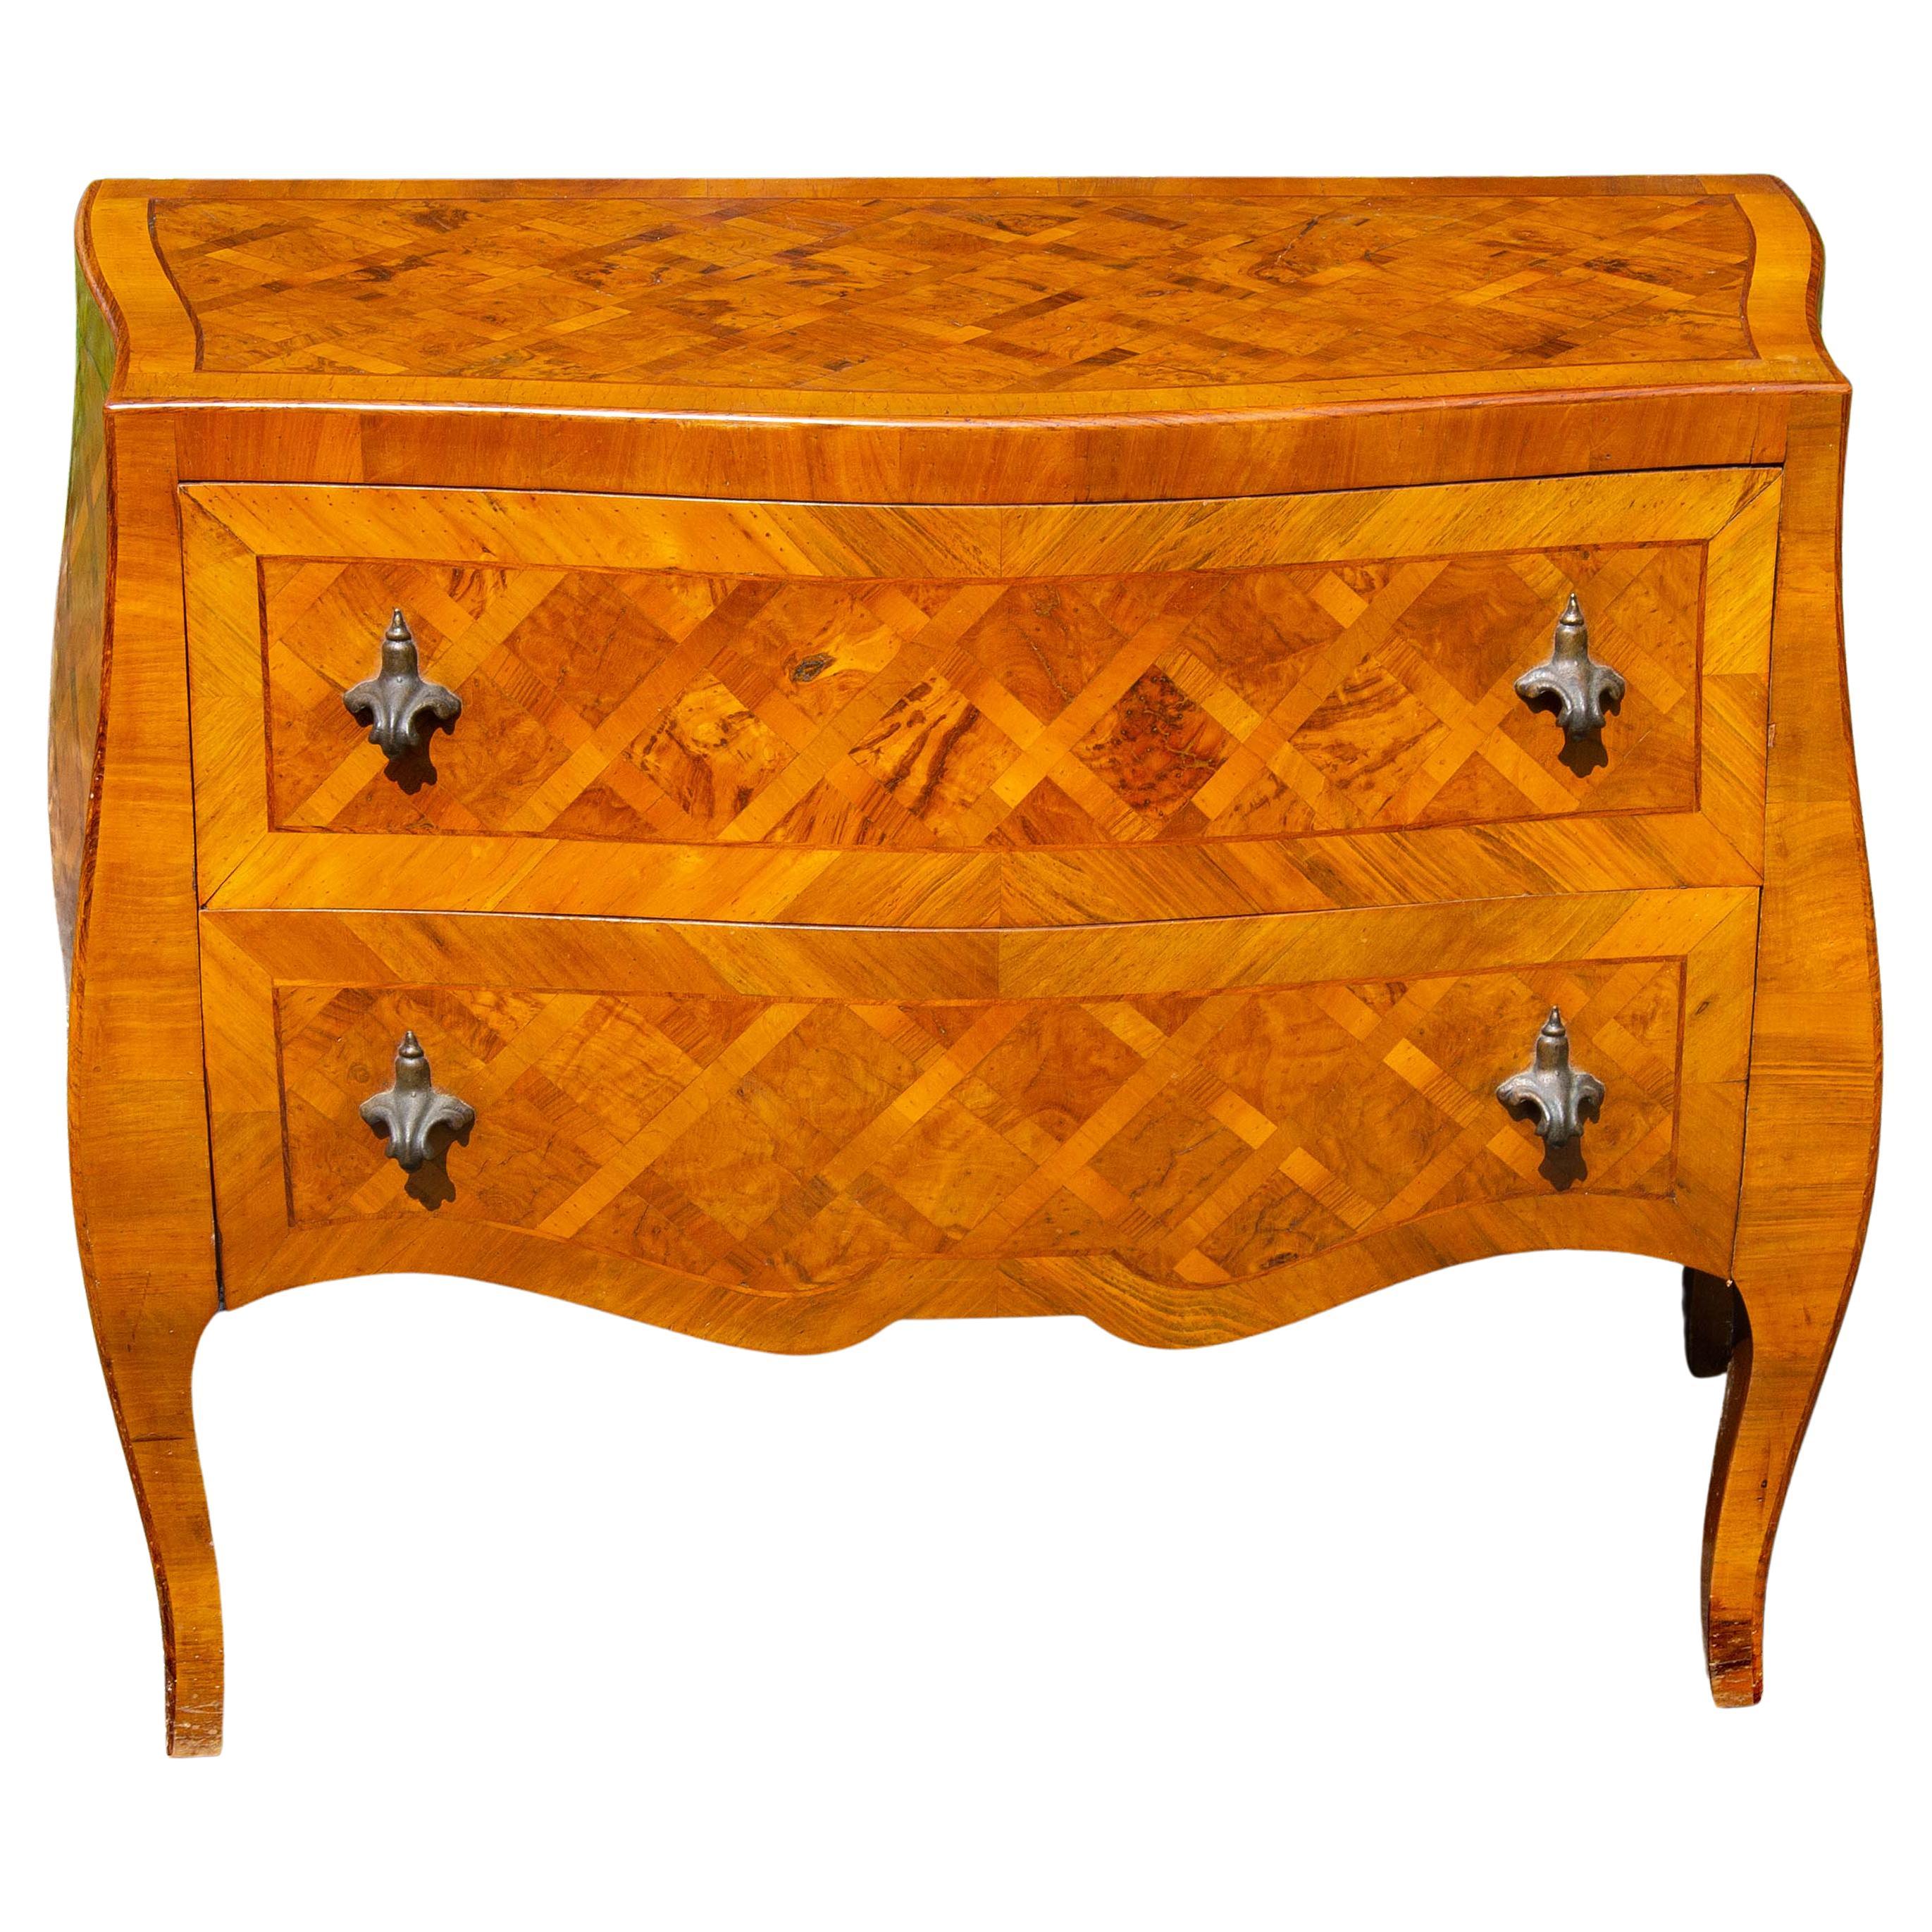 Vintage Italian two drawer bombe olive wood parquetry commode. Mid-20th century. Great color. Please, contact us for shipping options.
Presented by Joseph Dasta.